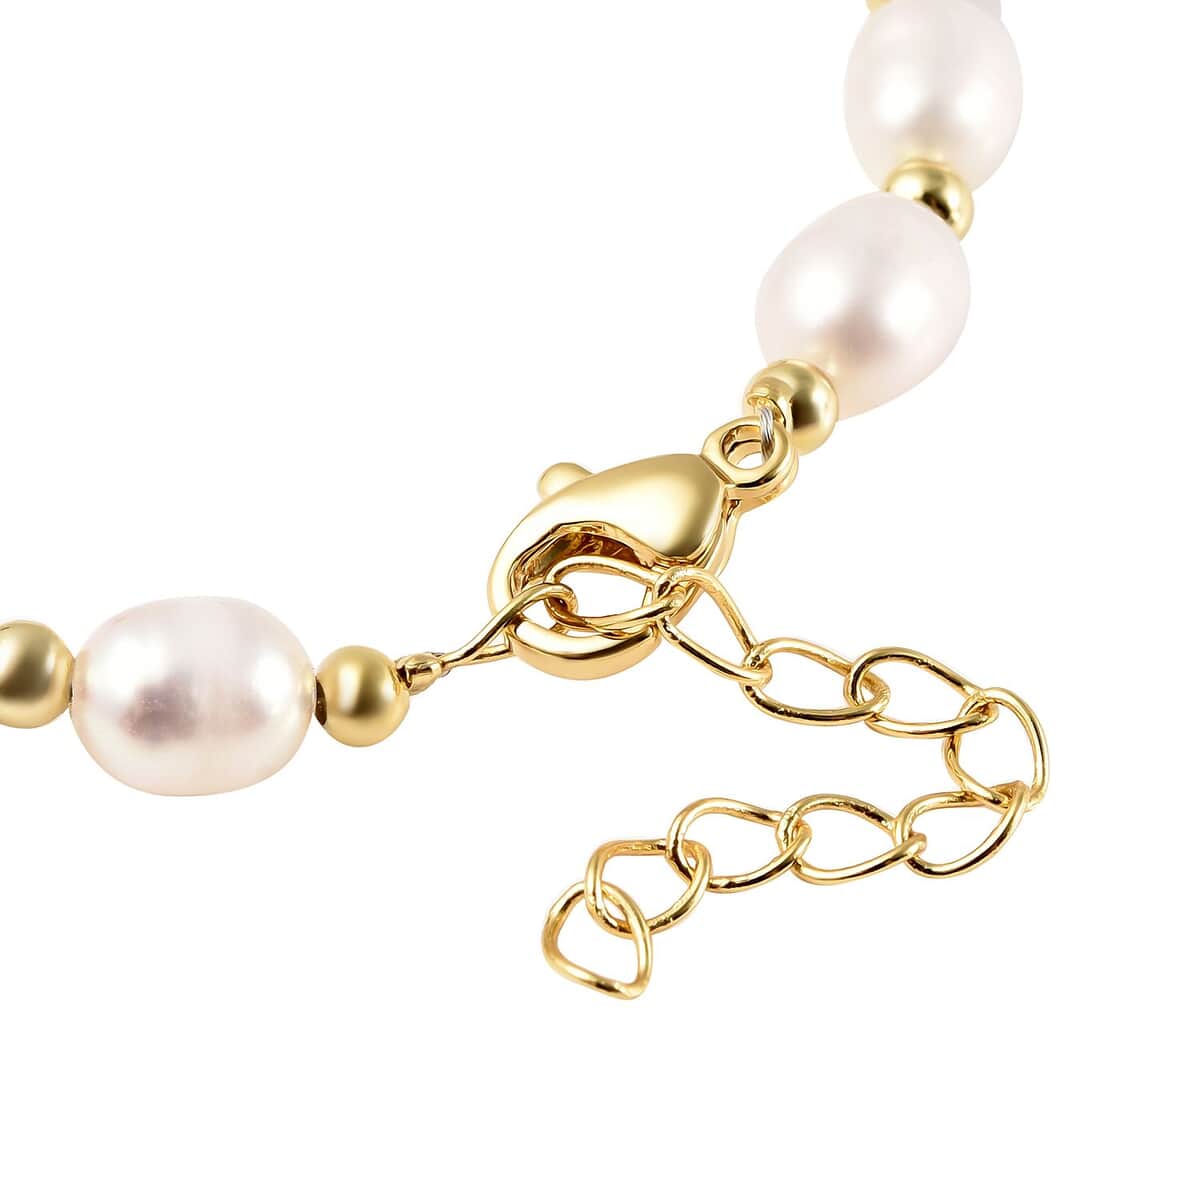 Simulated Ruby and White Freshwater Pearl Bracelet With Four Clover Leaf Charm in Goldtone Lobster Clasp (7.5-9.5-In) image number 4